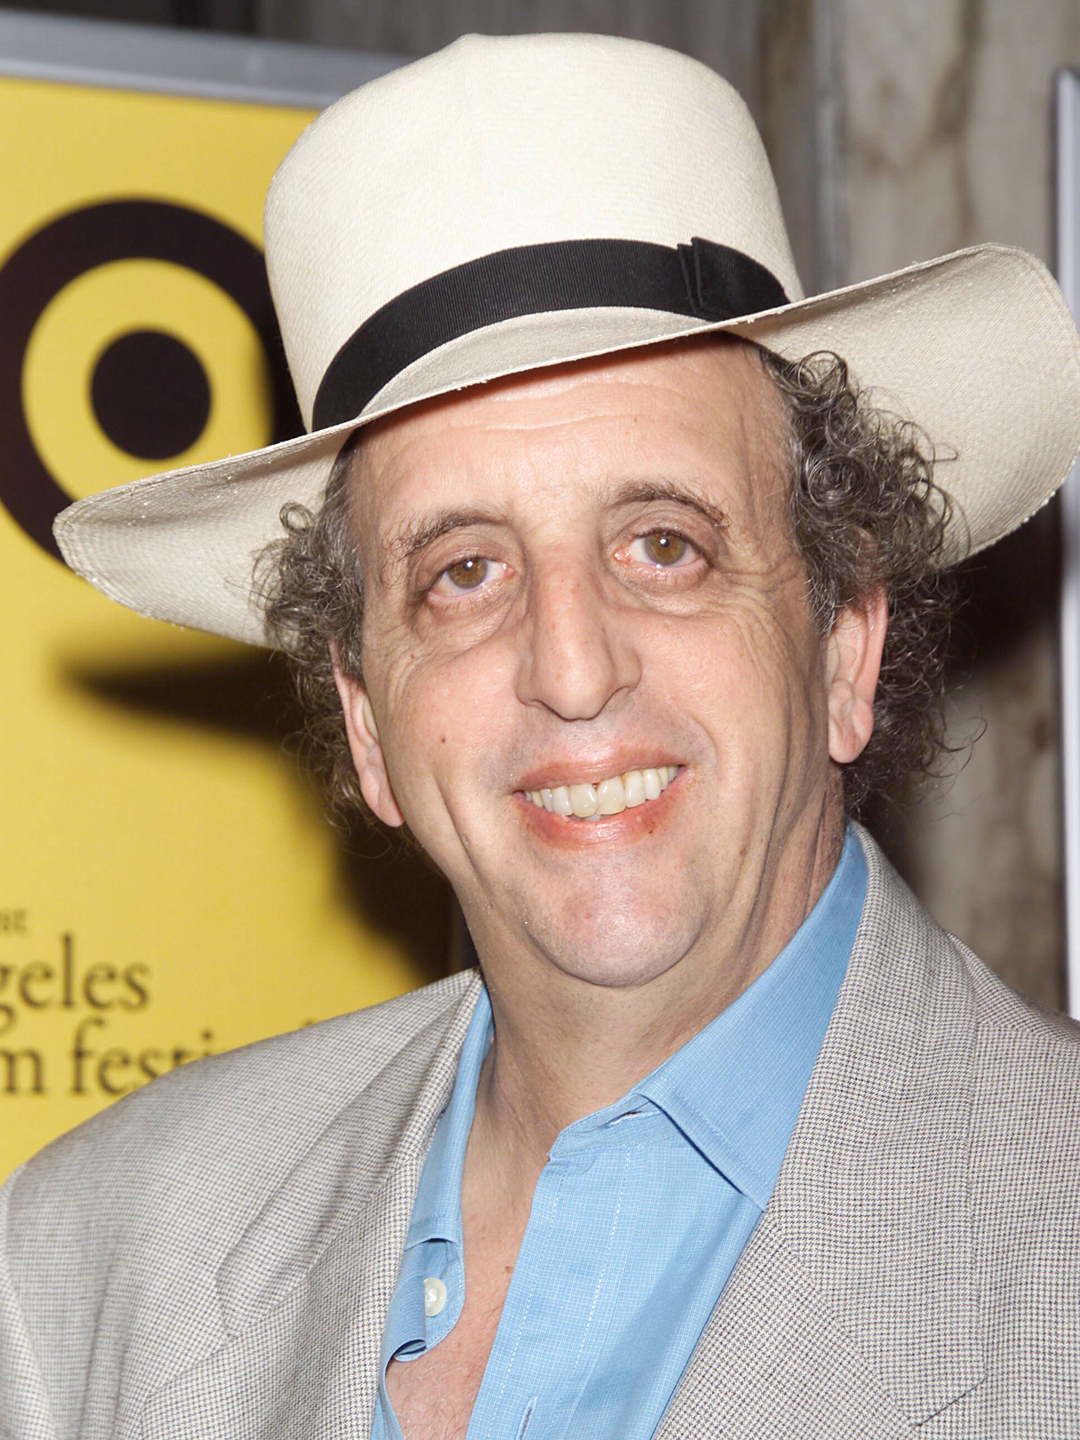 How tall is Vincent Schiavelli?